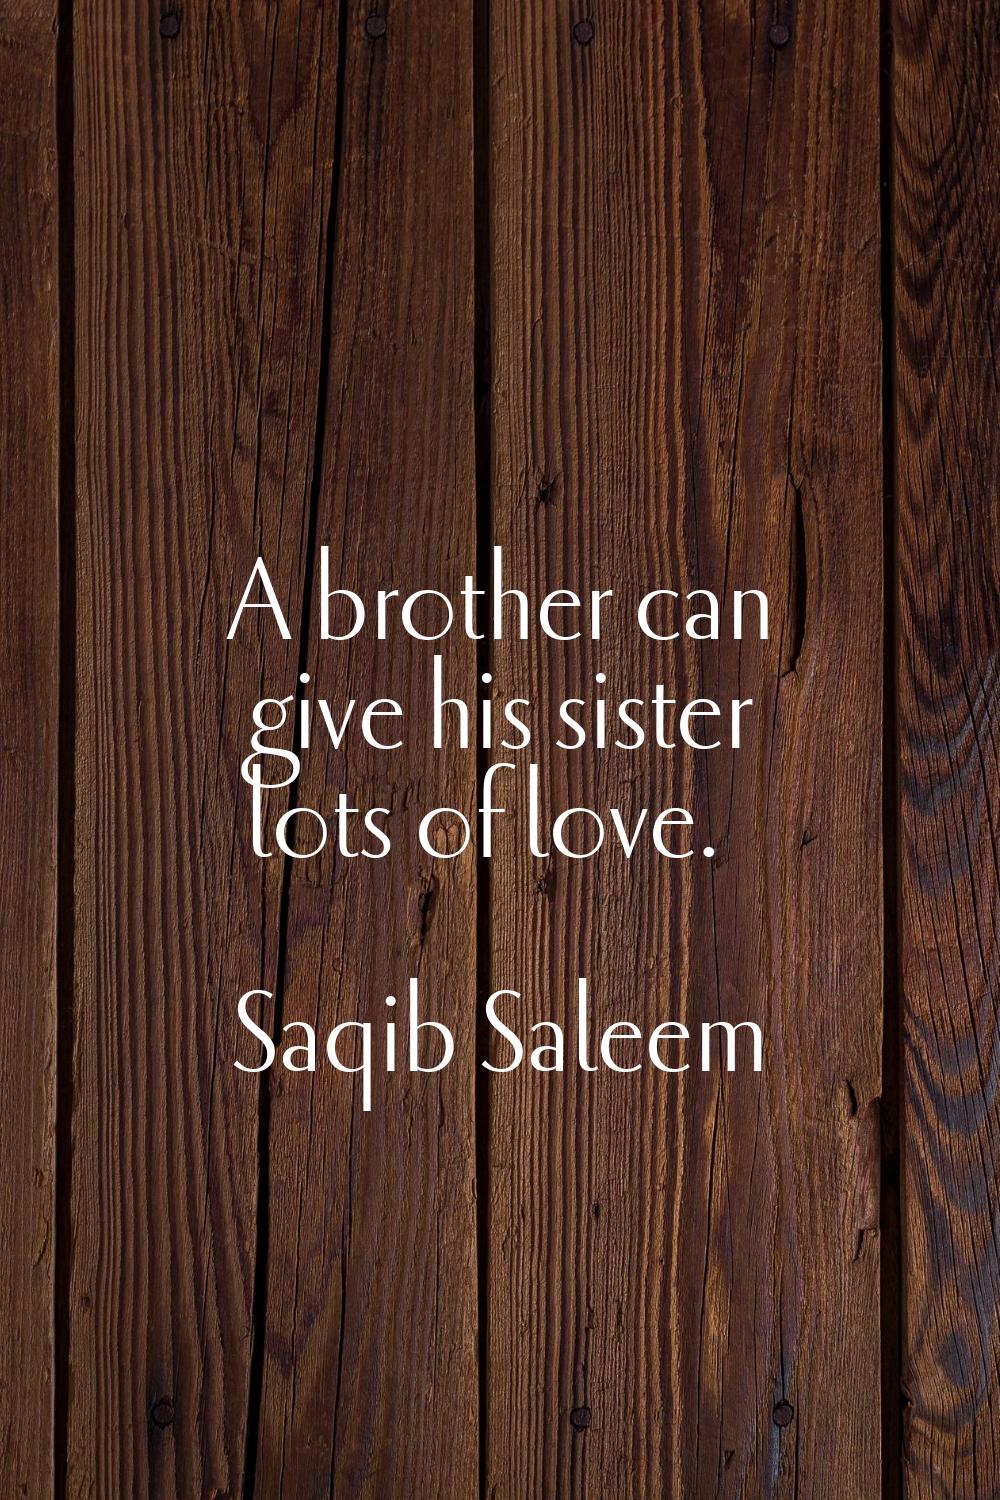 A brother can give his sister lots of love.